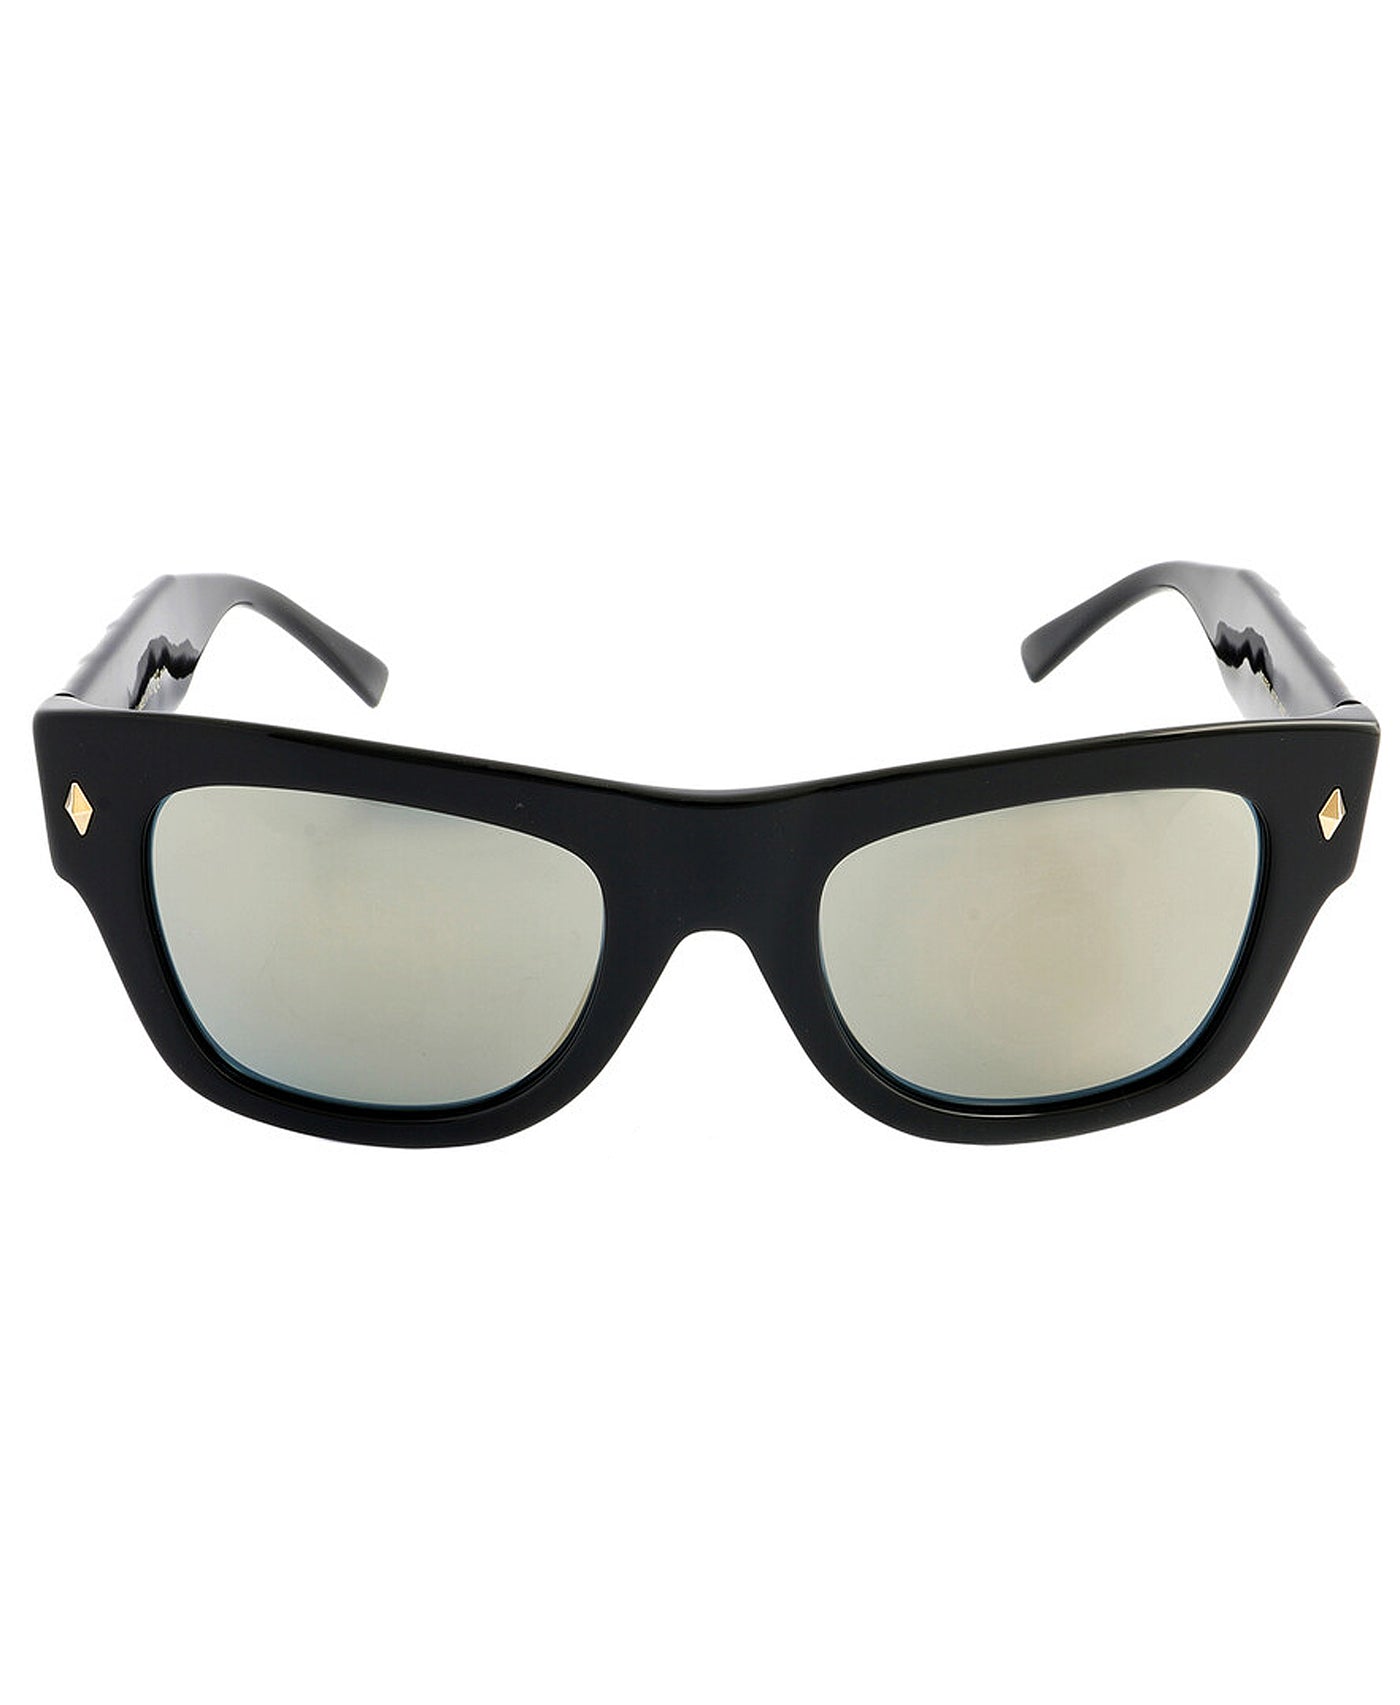 Thick Rectangle Sunglasses image 1